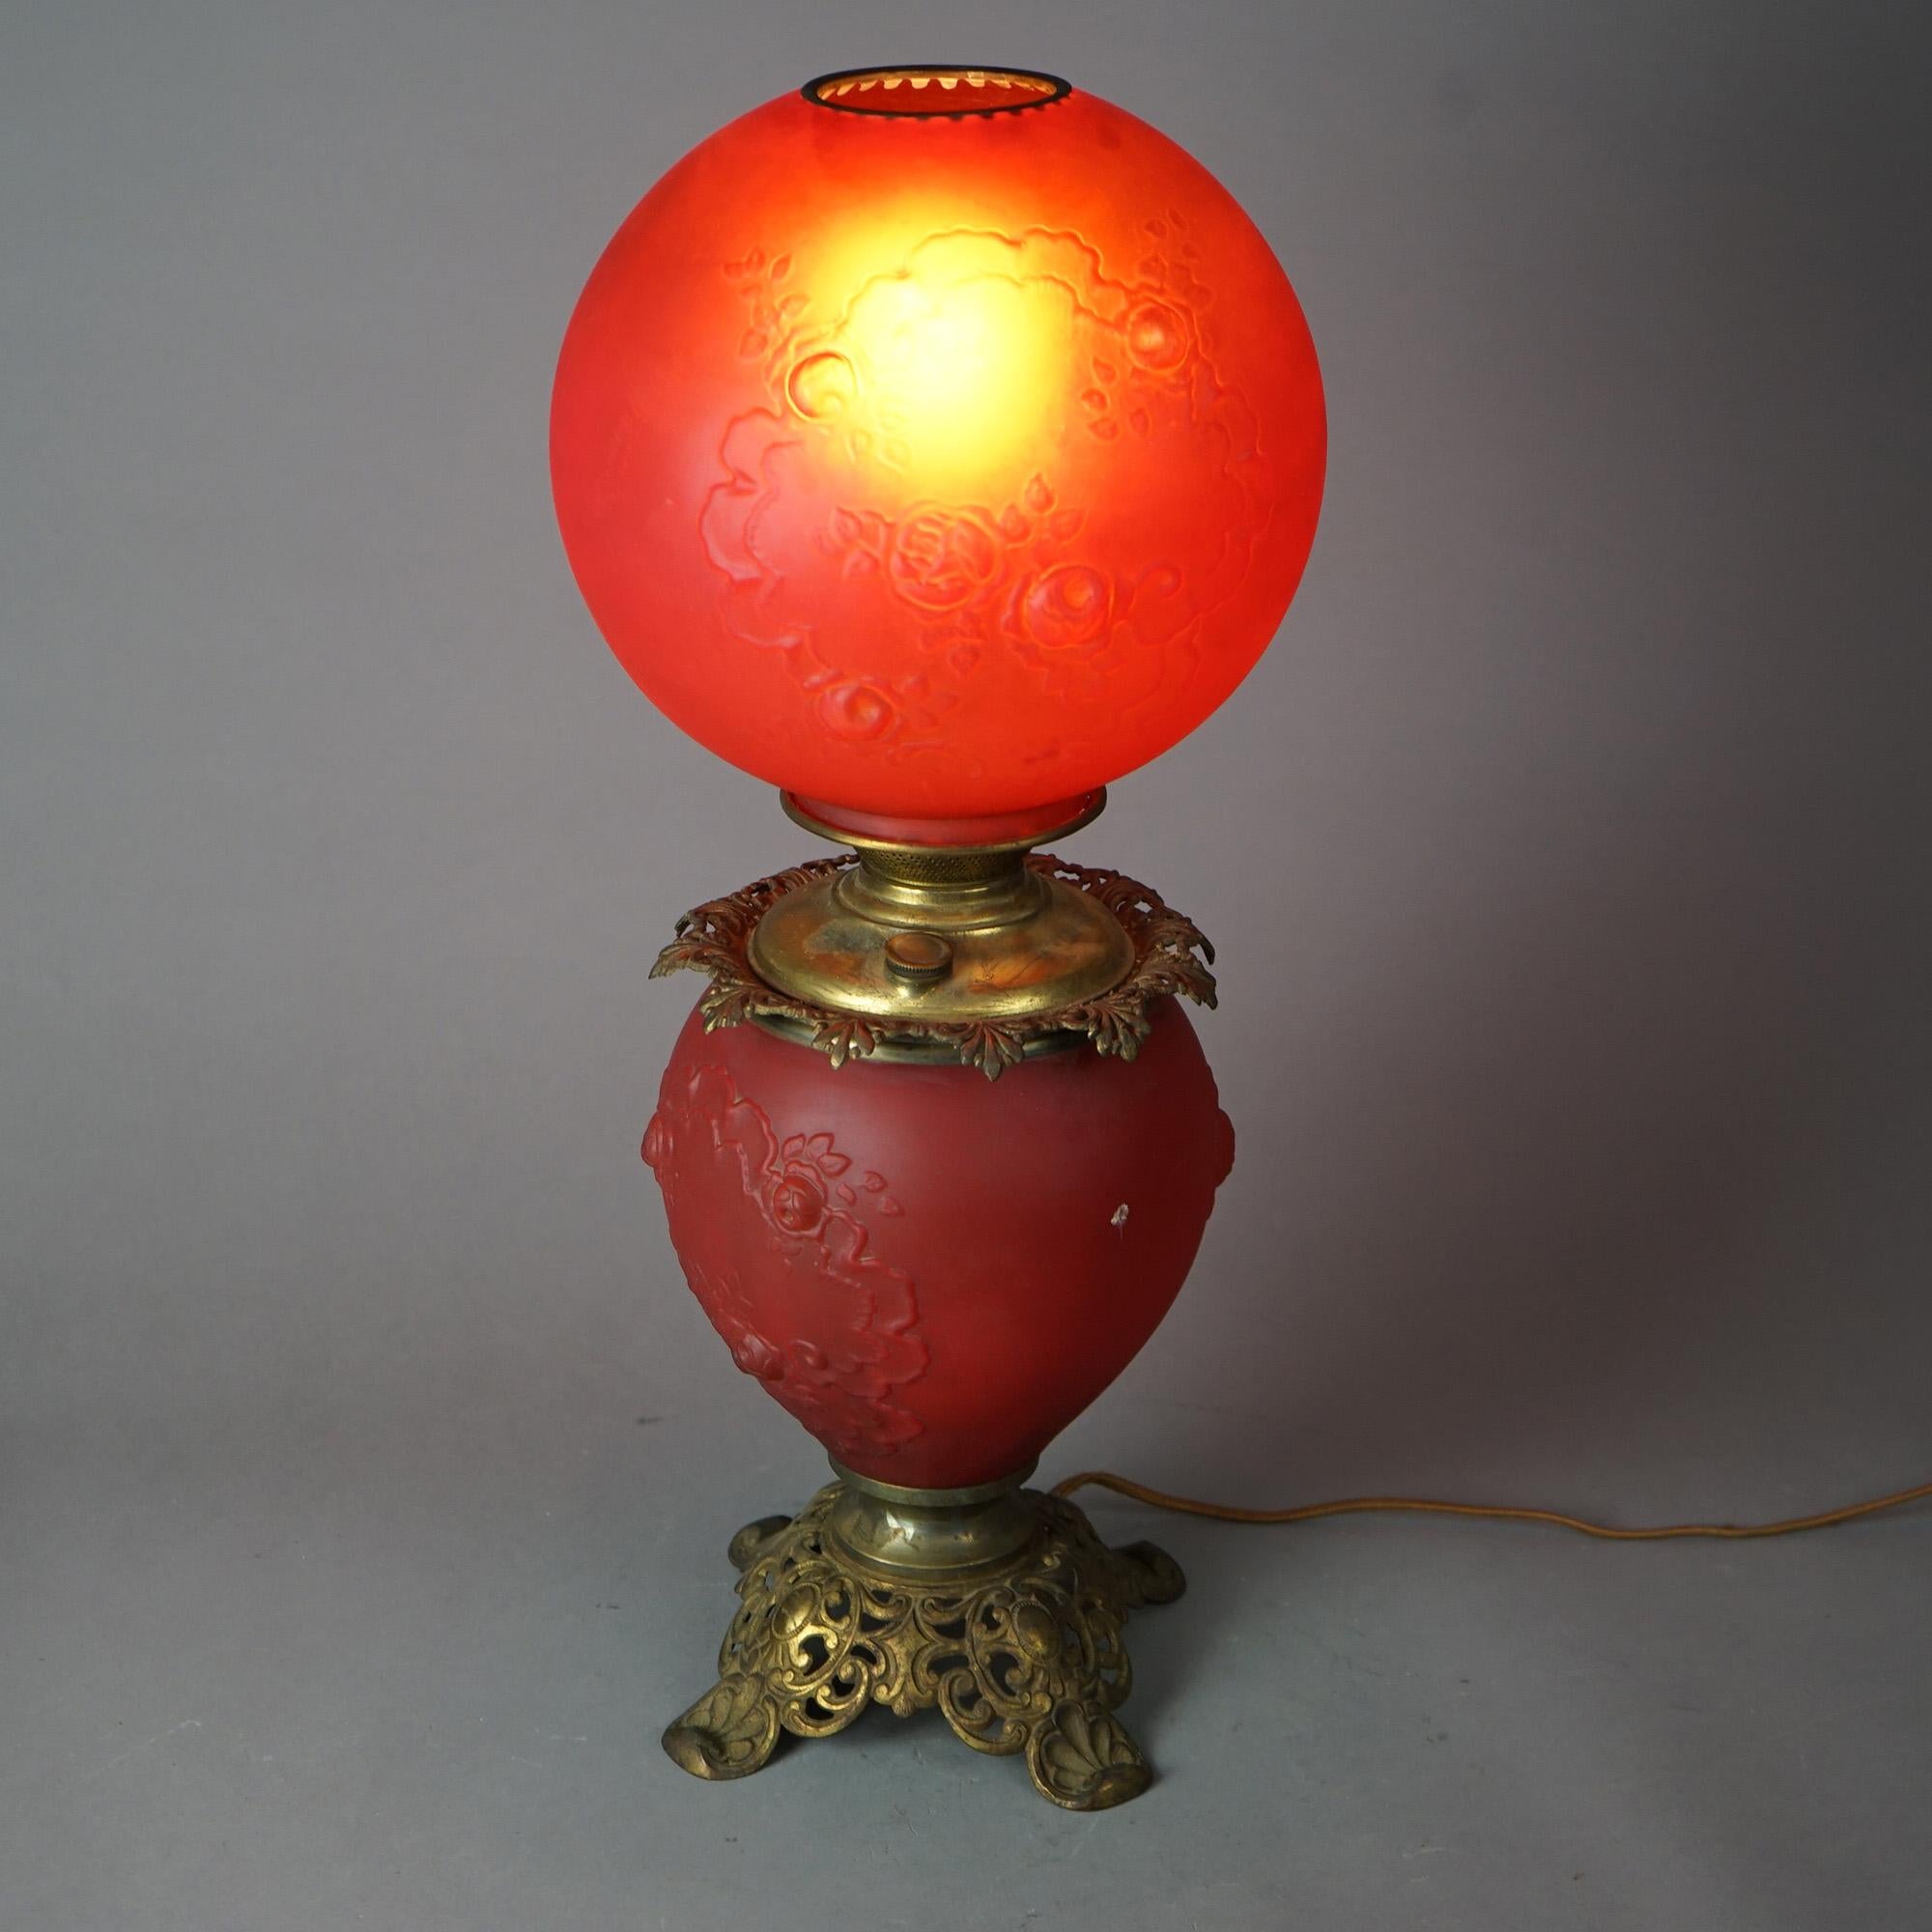 Antique Brass & Cranberry Glass Gone With The Wind Floral Embossed Lamp c1890 For Sale 8